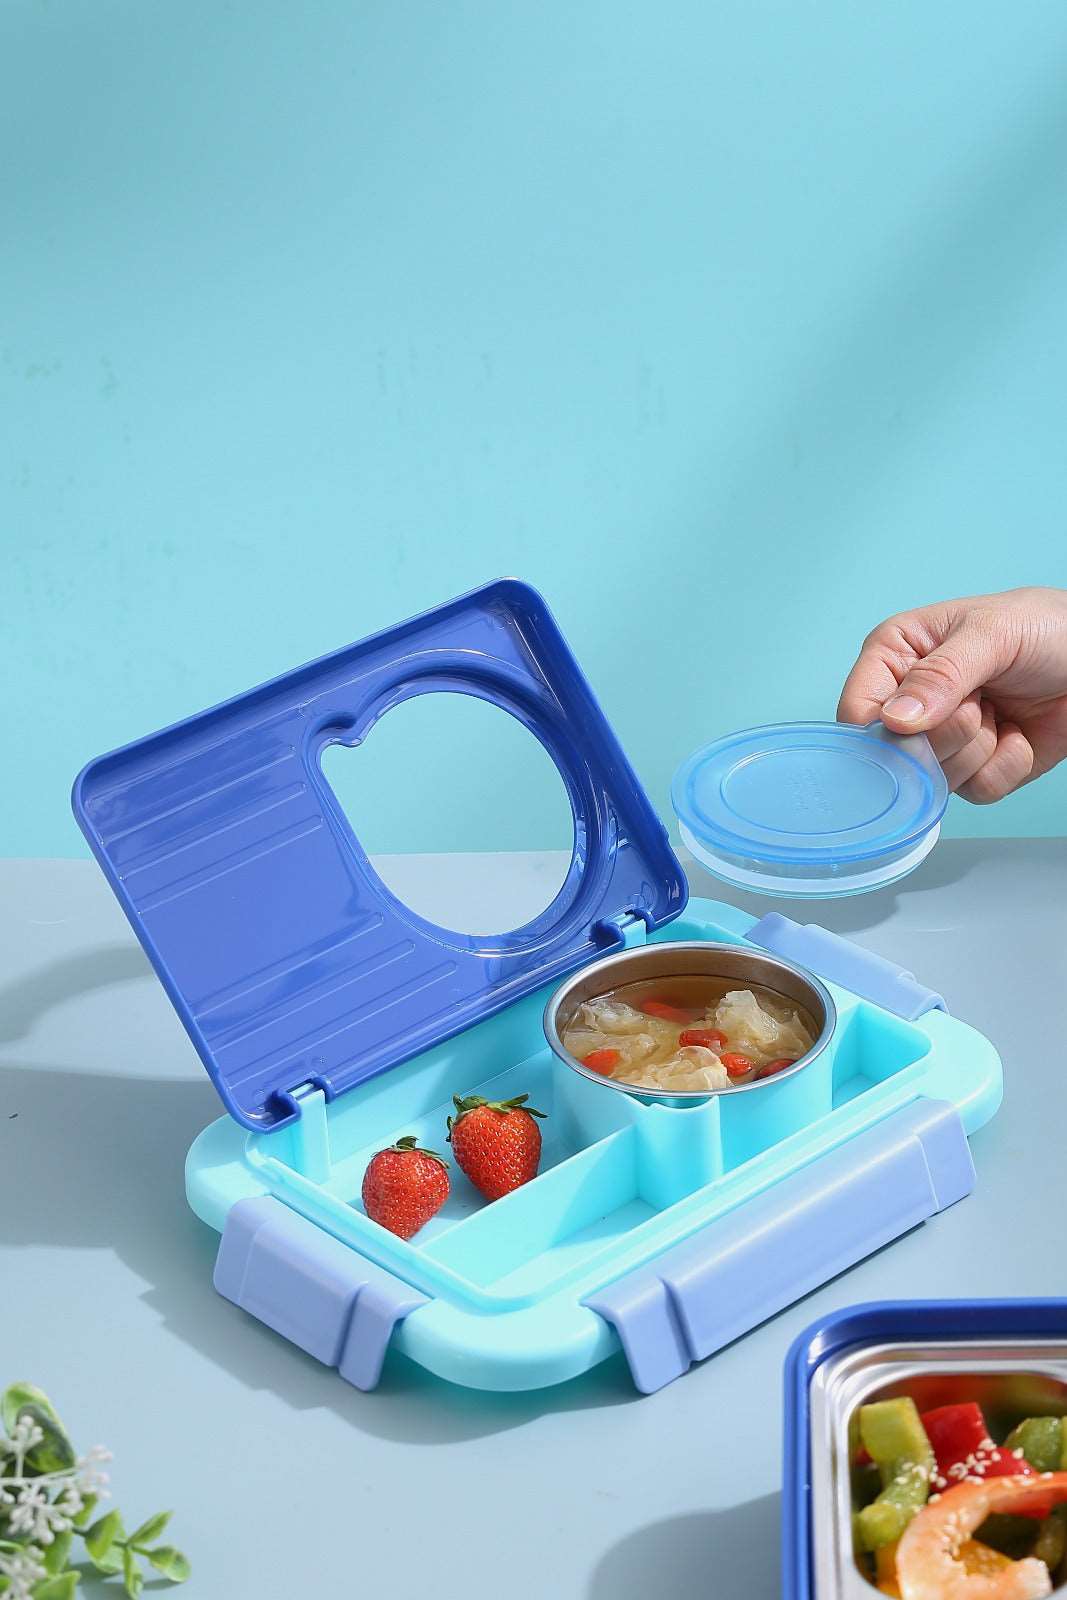 Cherry Berry stainless steel lunch box 3 Grid + Soup Bowl NIYO TOYS